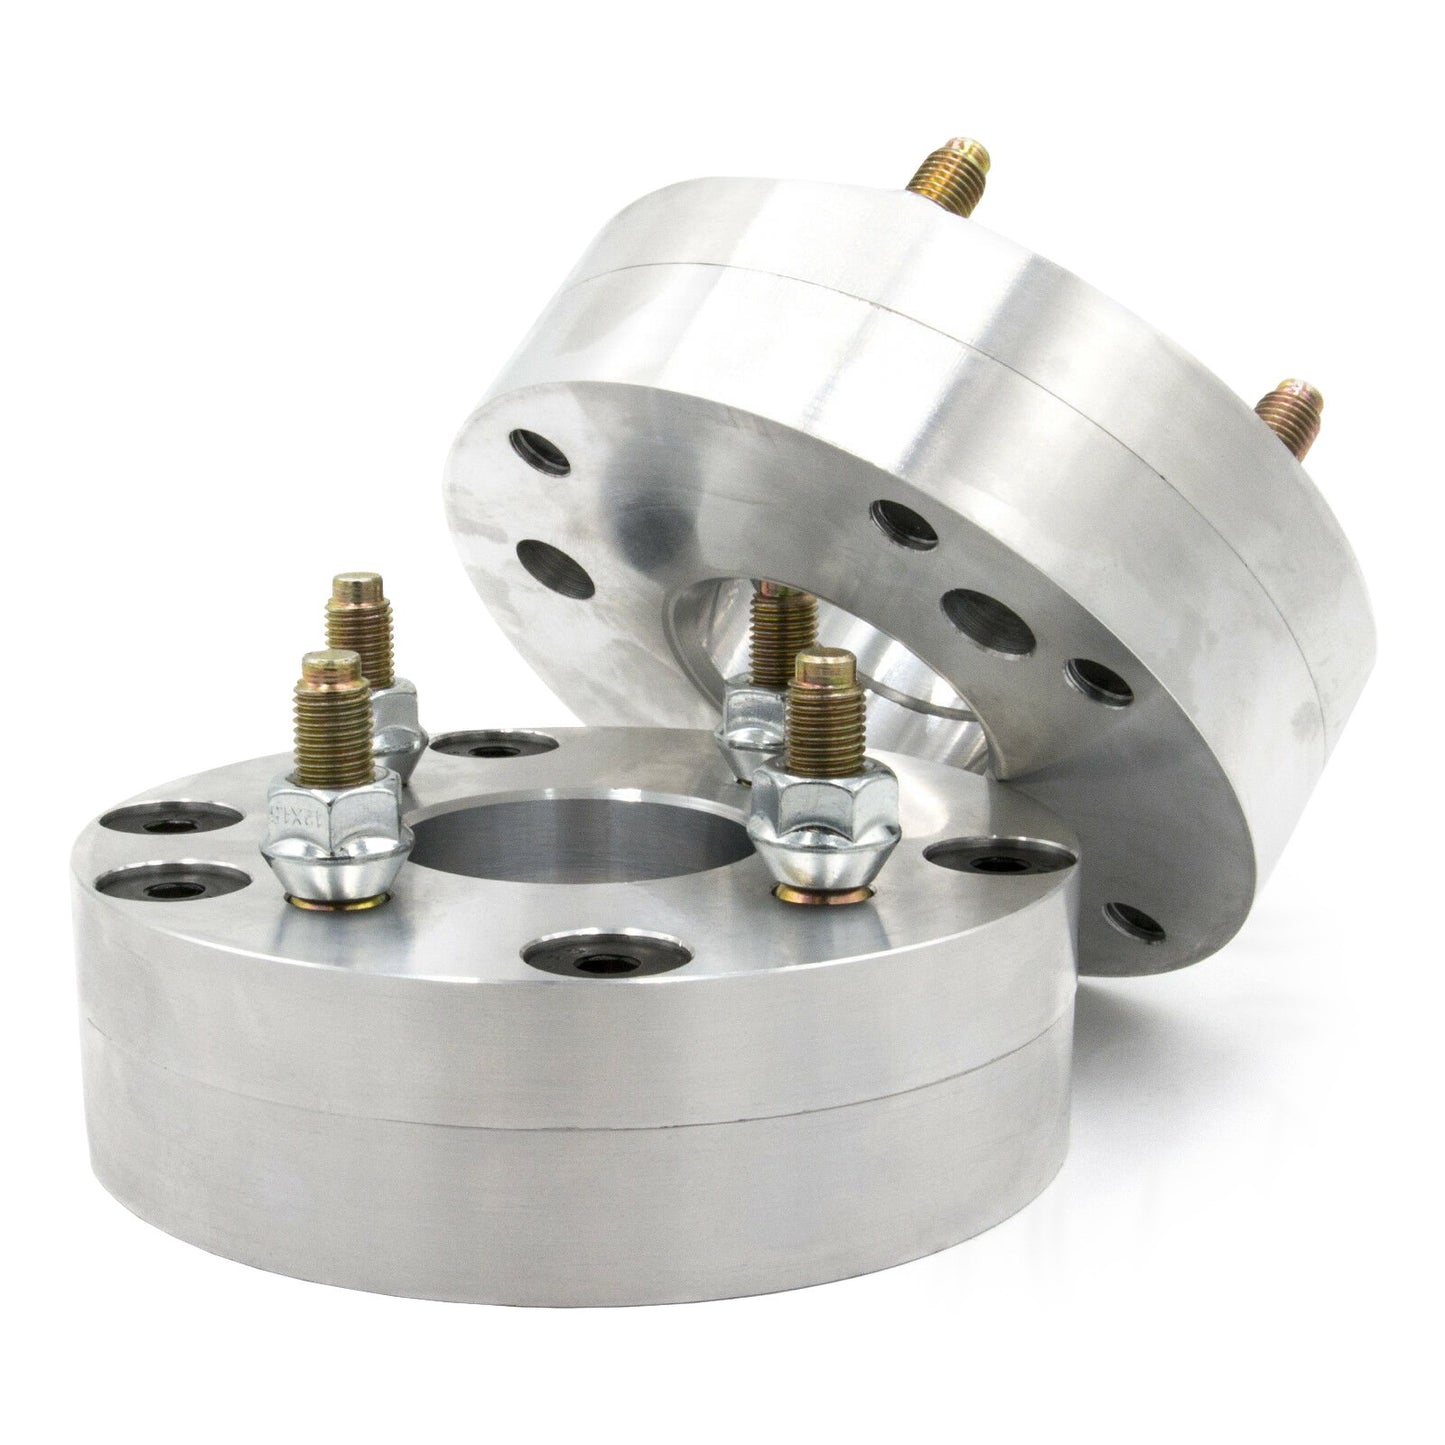 5x5.5" to 4x4.5" 2 piece Wheel Adapter - Thickness: 1.5" - 3"